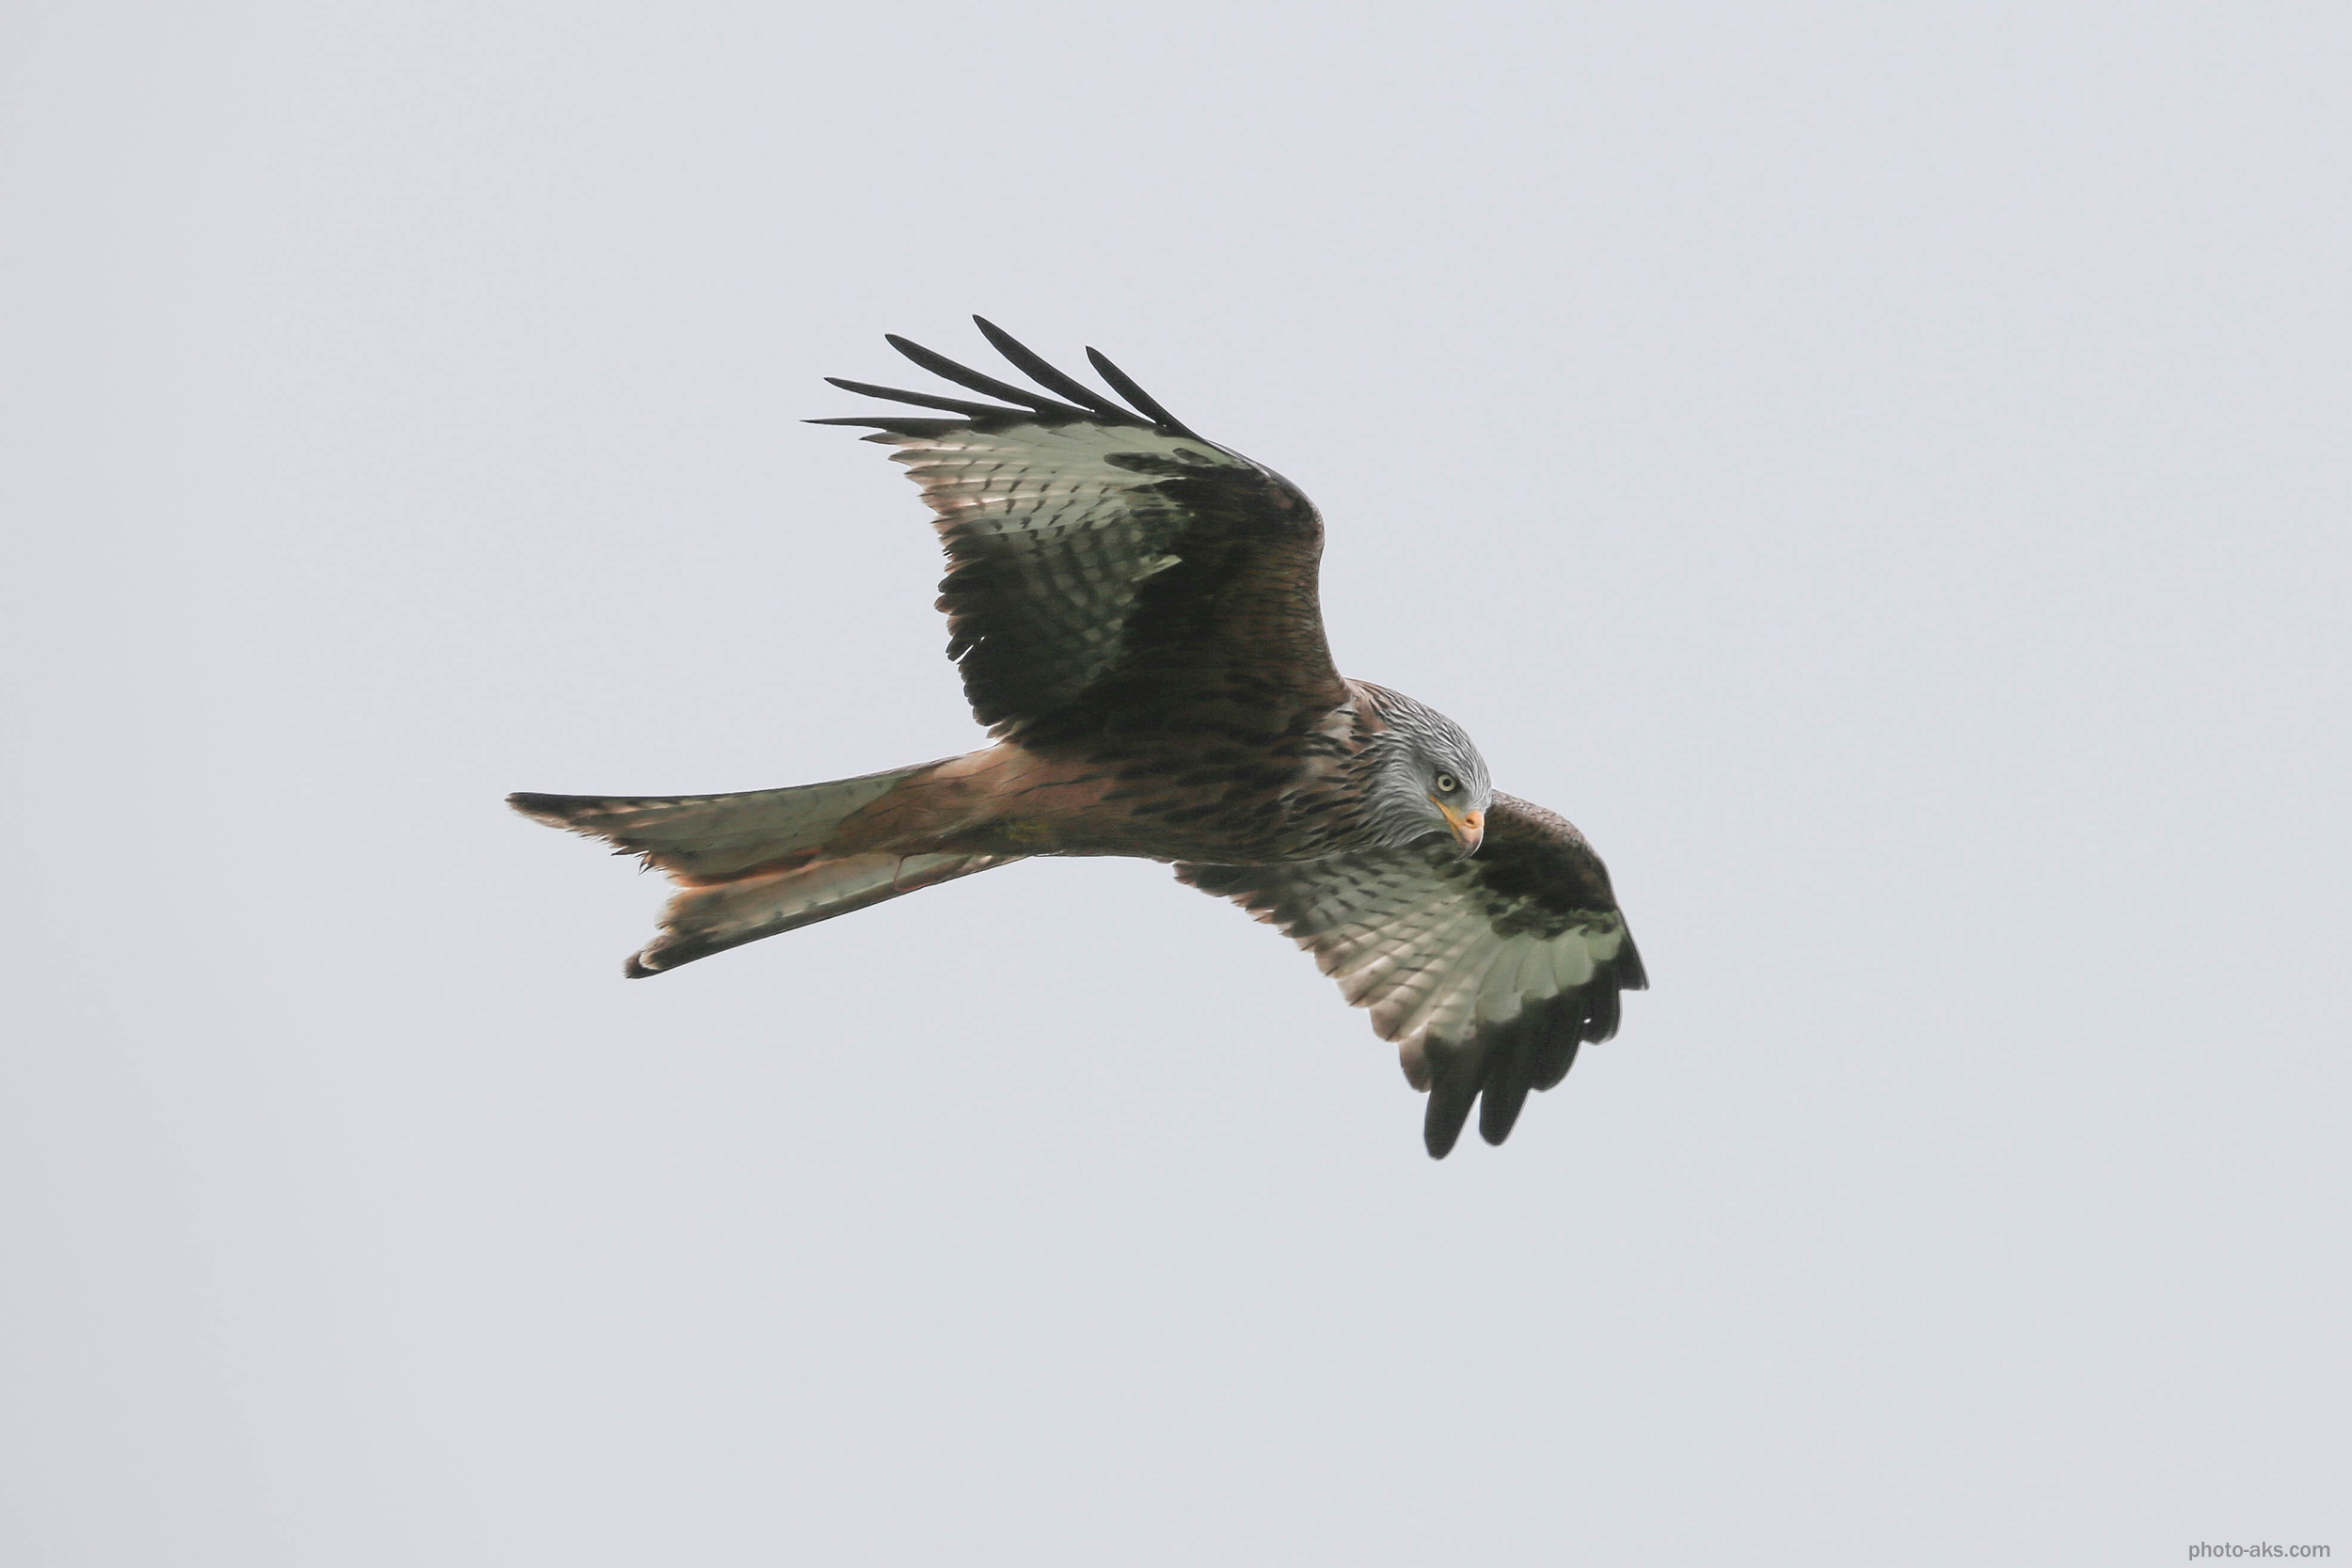 picture of a kite bird in flight